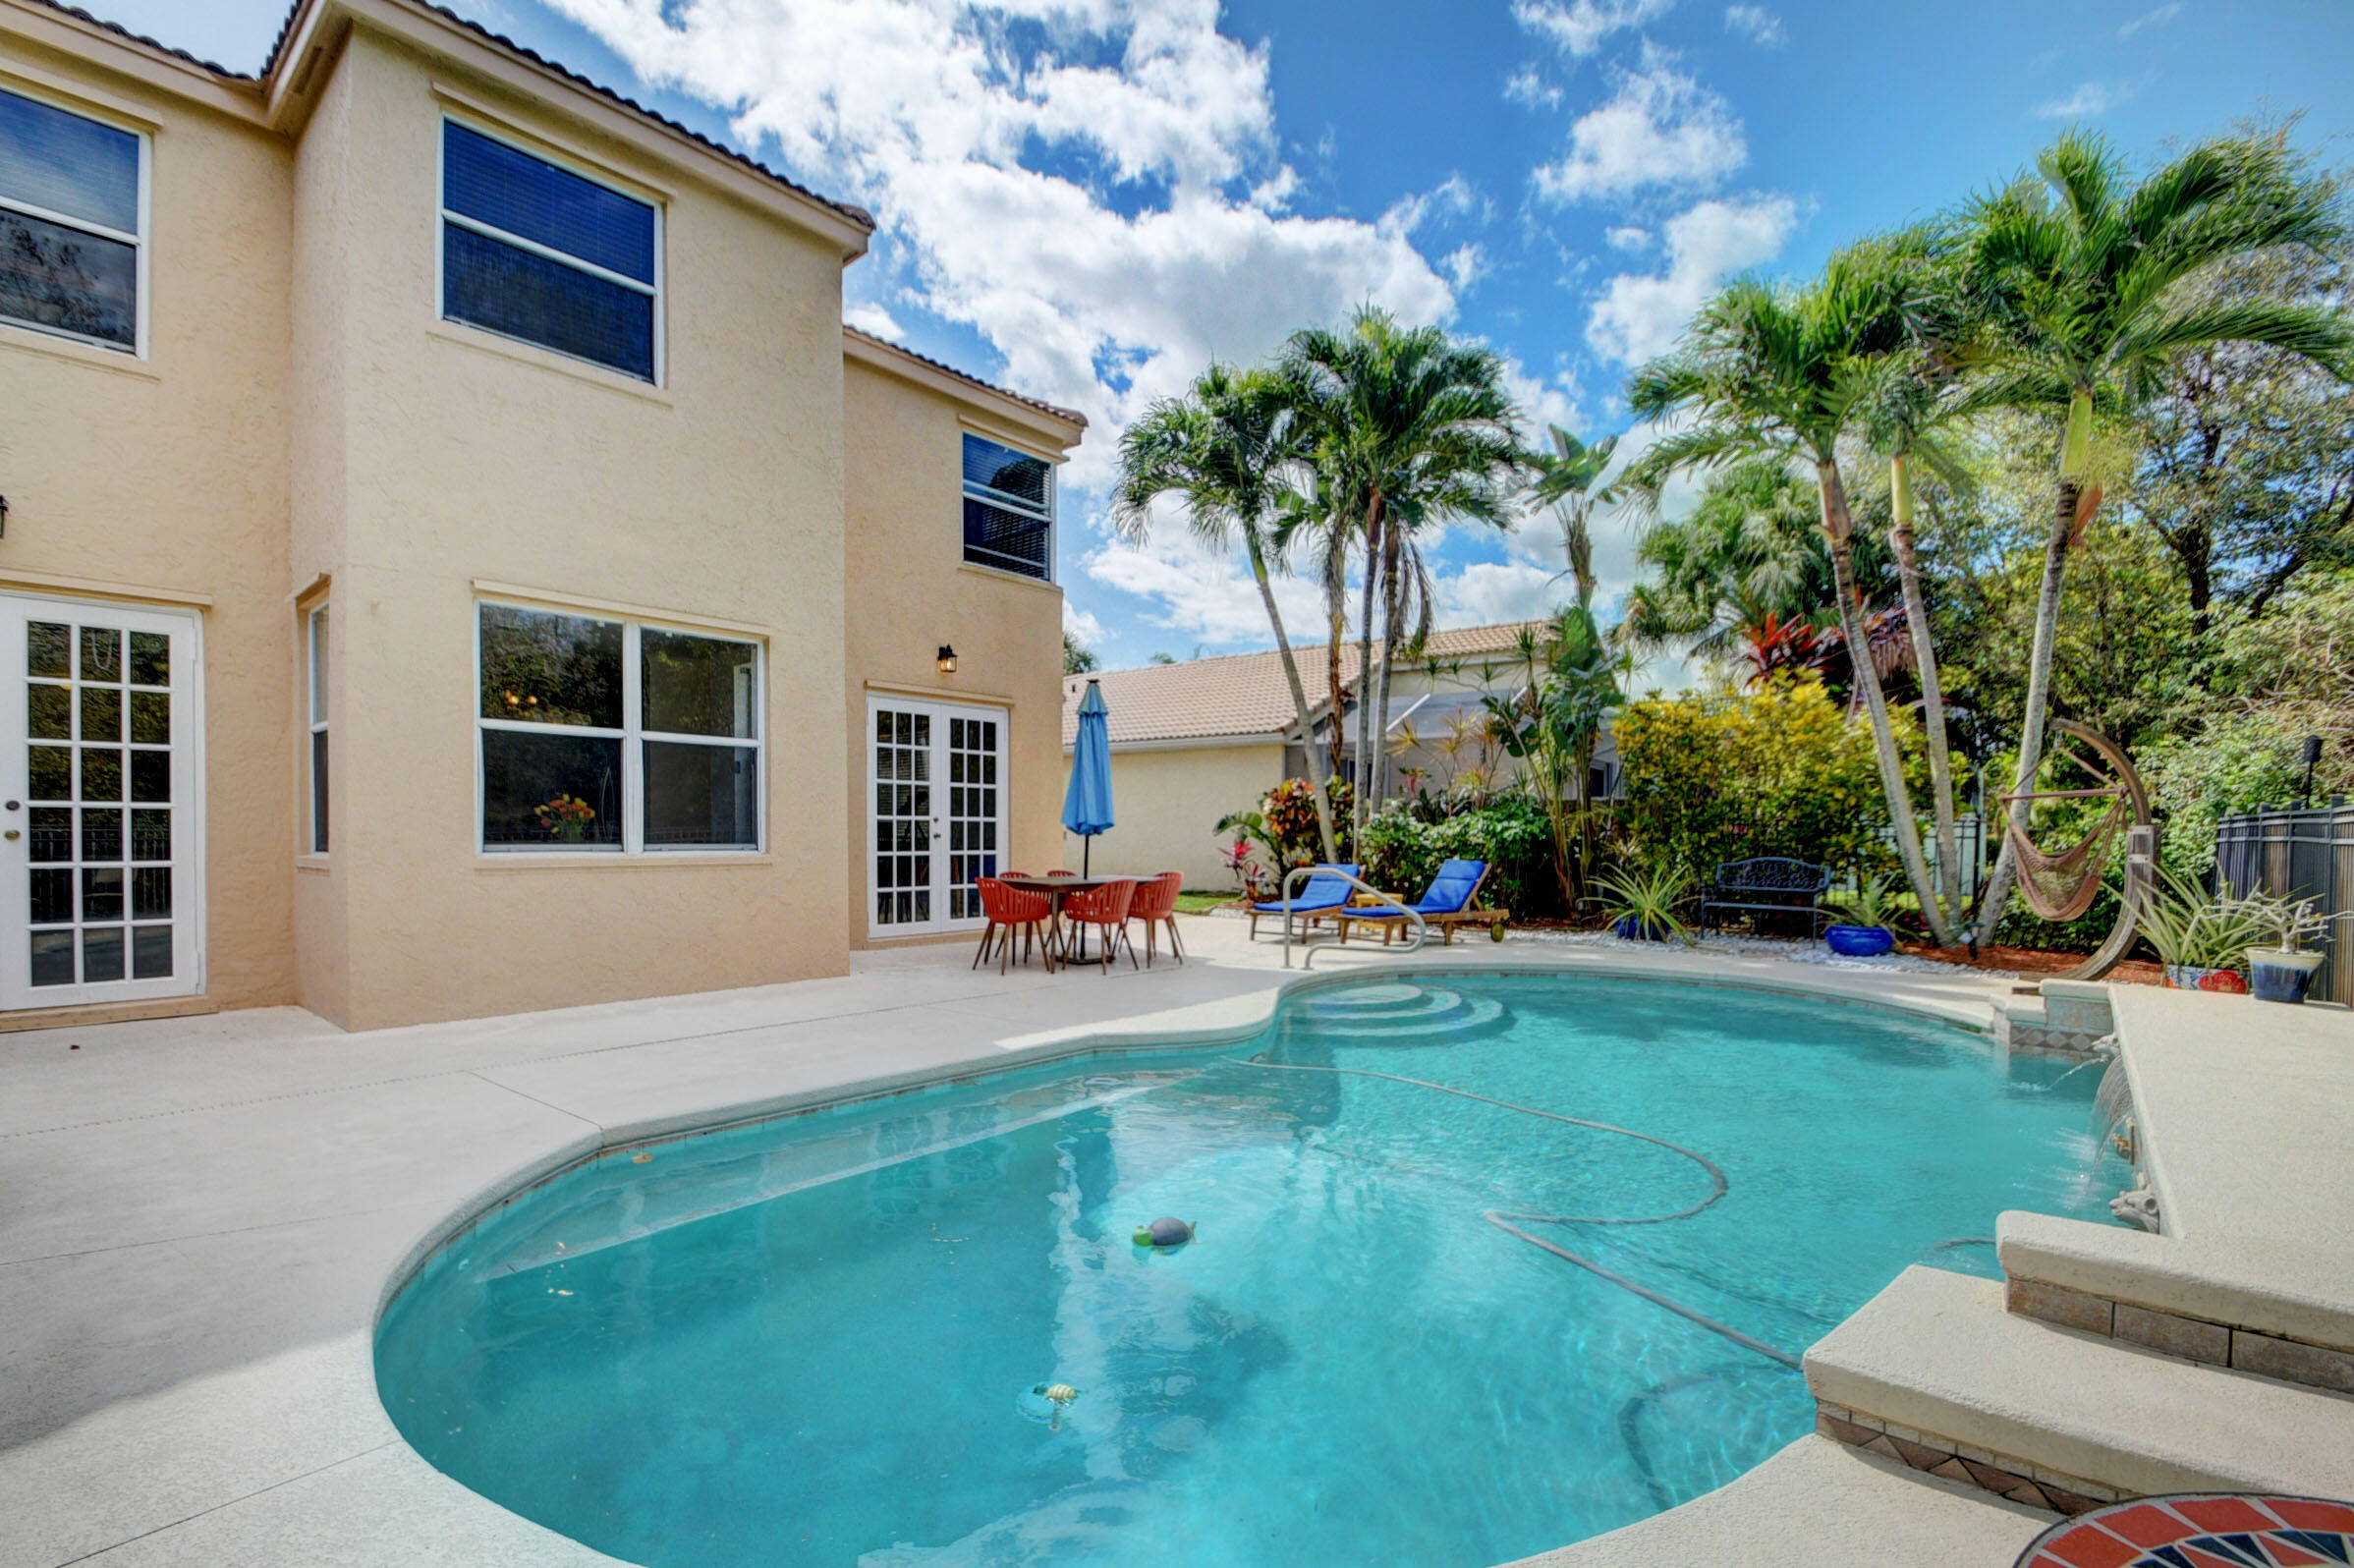 7565 Kingsley Court, Lake Worth, Palm Beach County, Florida - 4 Bedrooms  
2.5 Bathrooms - 